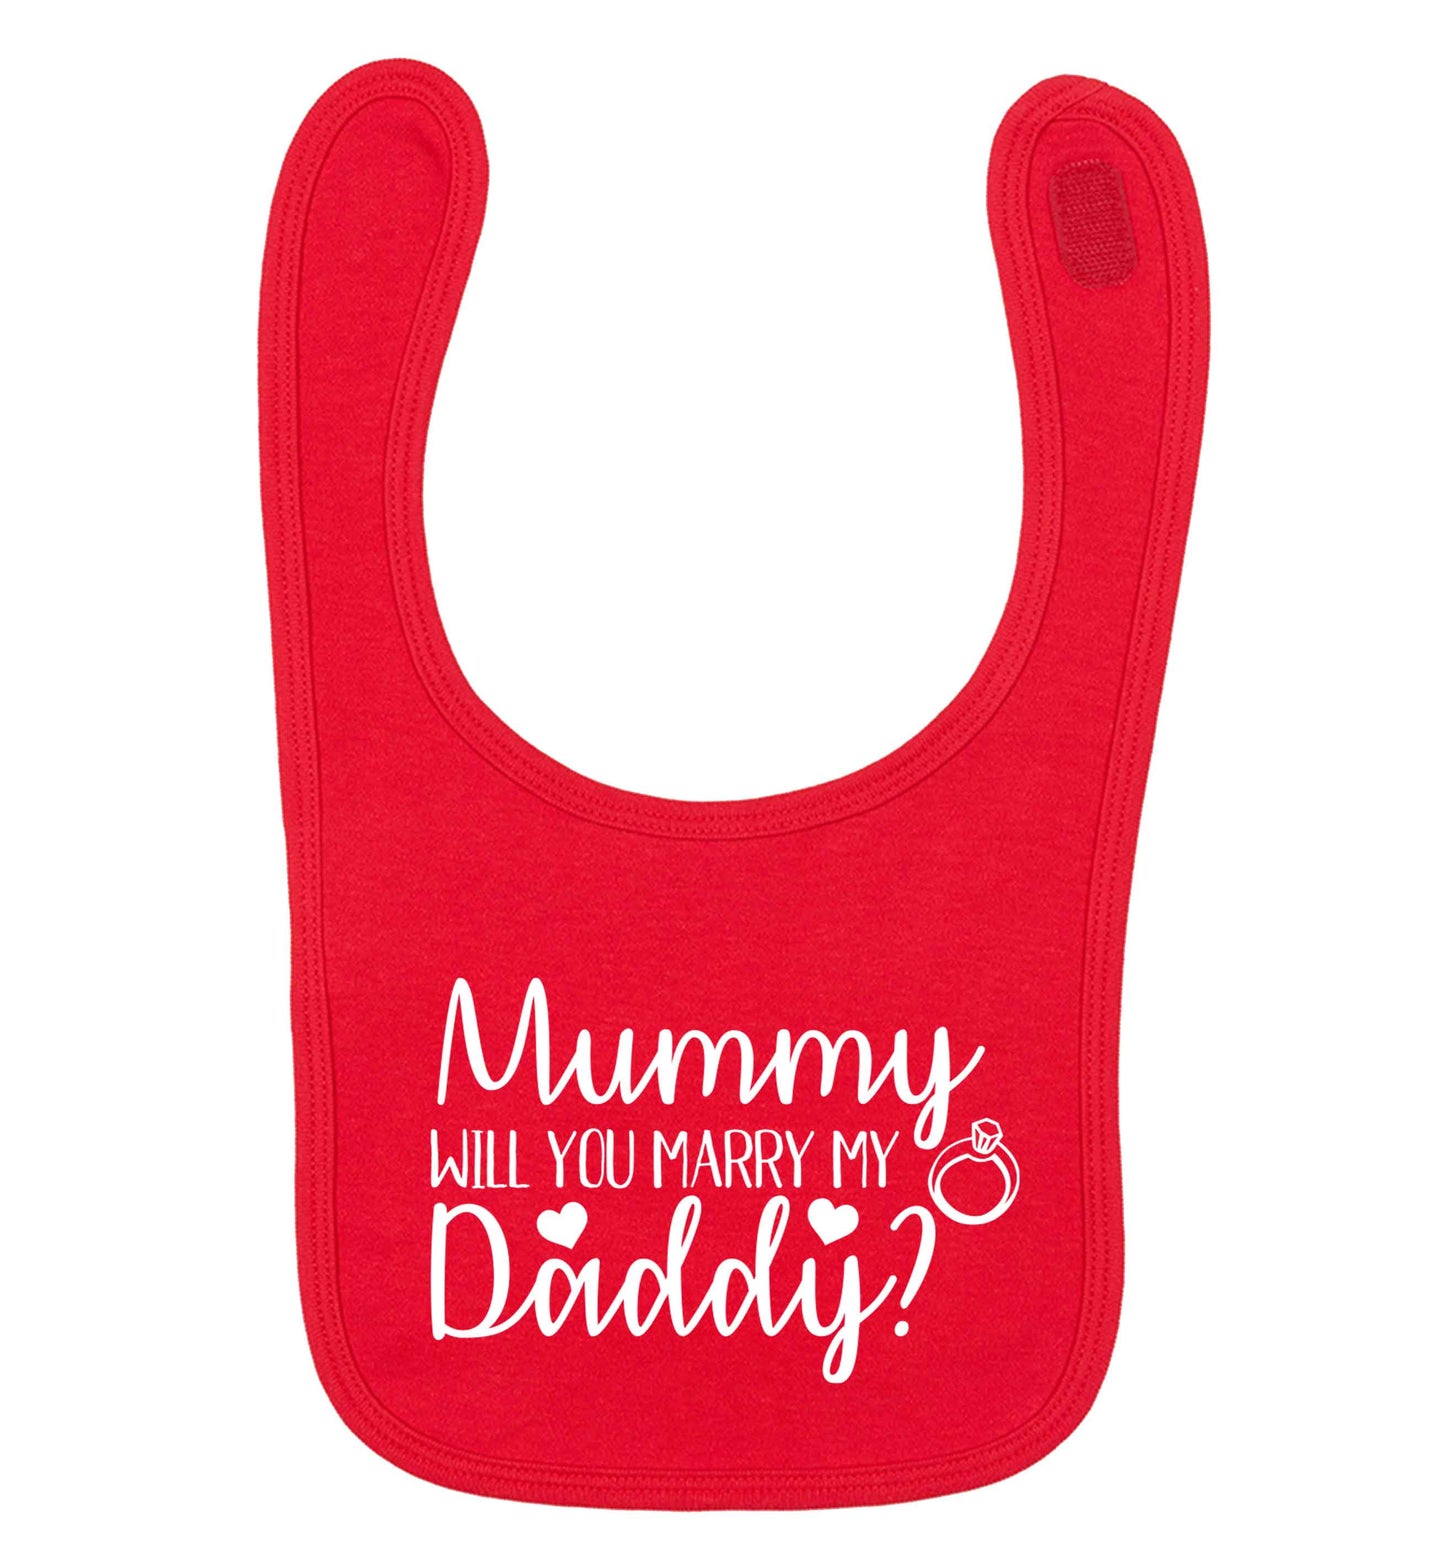 Looking for a unique way to pop the question? Why not let your kids do it!  red baby bib